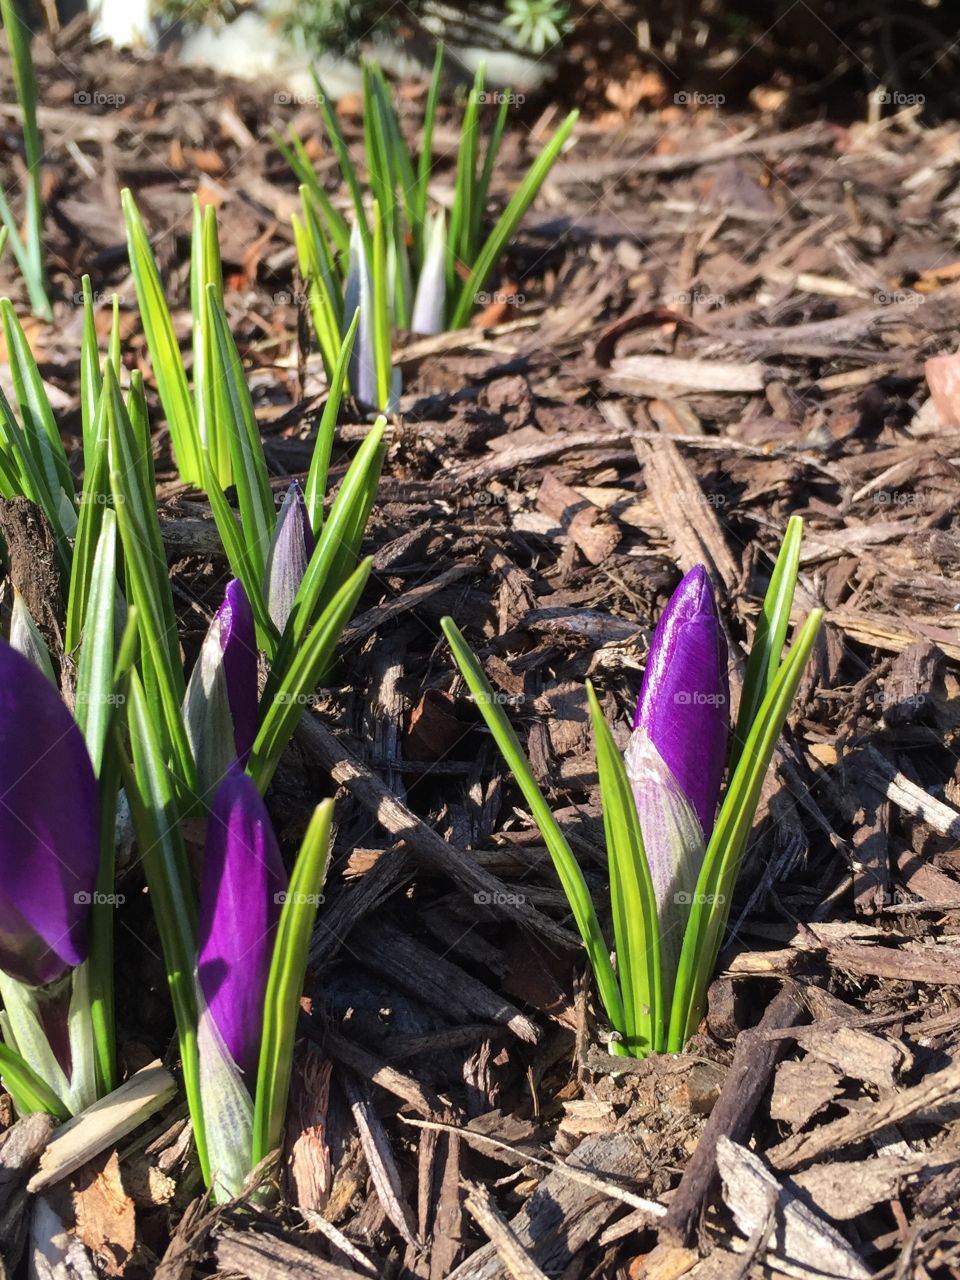 Crocus buds are always the first sign of spring 🌱